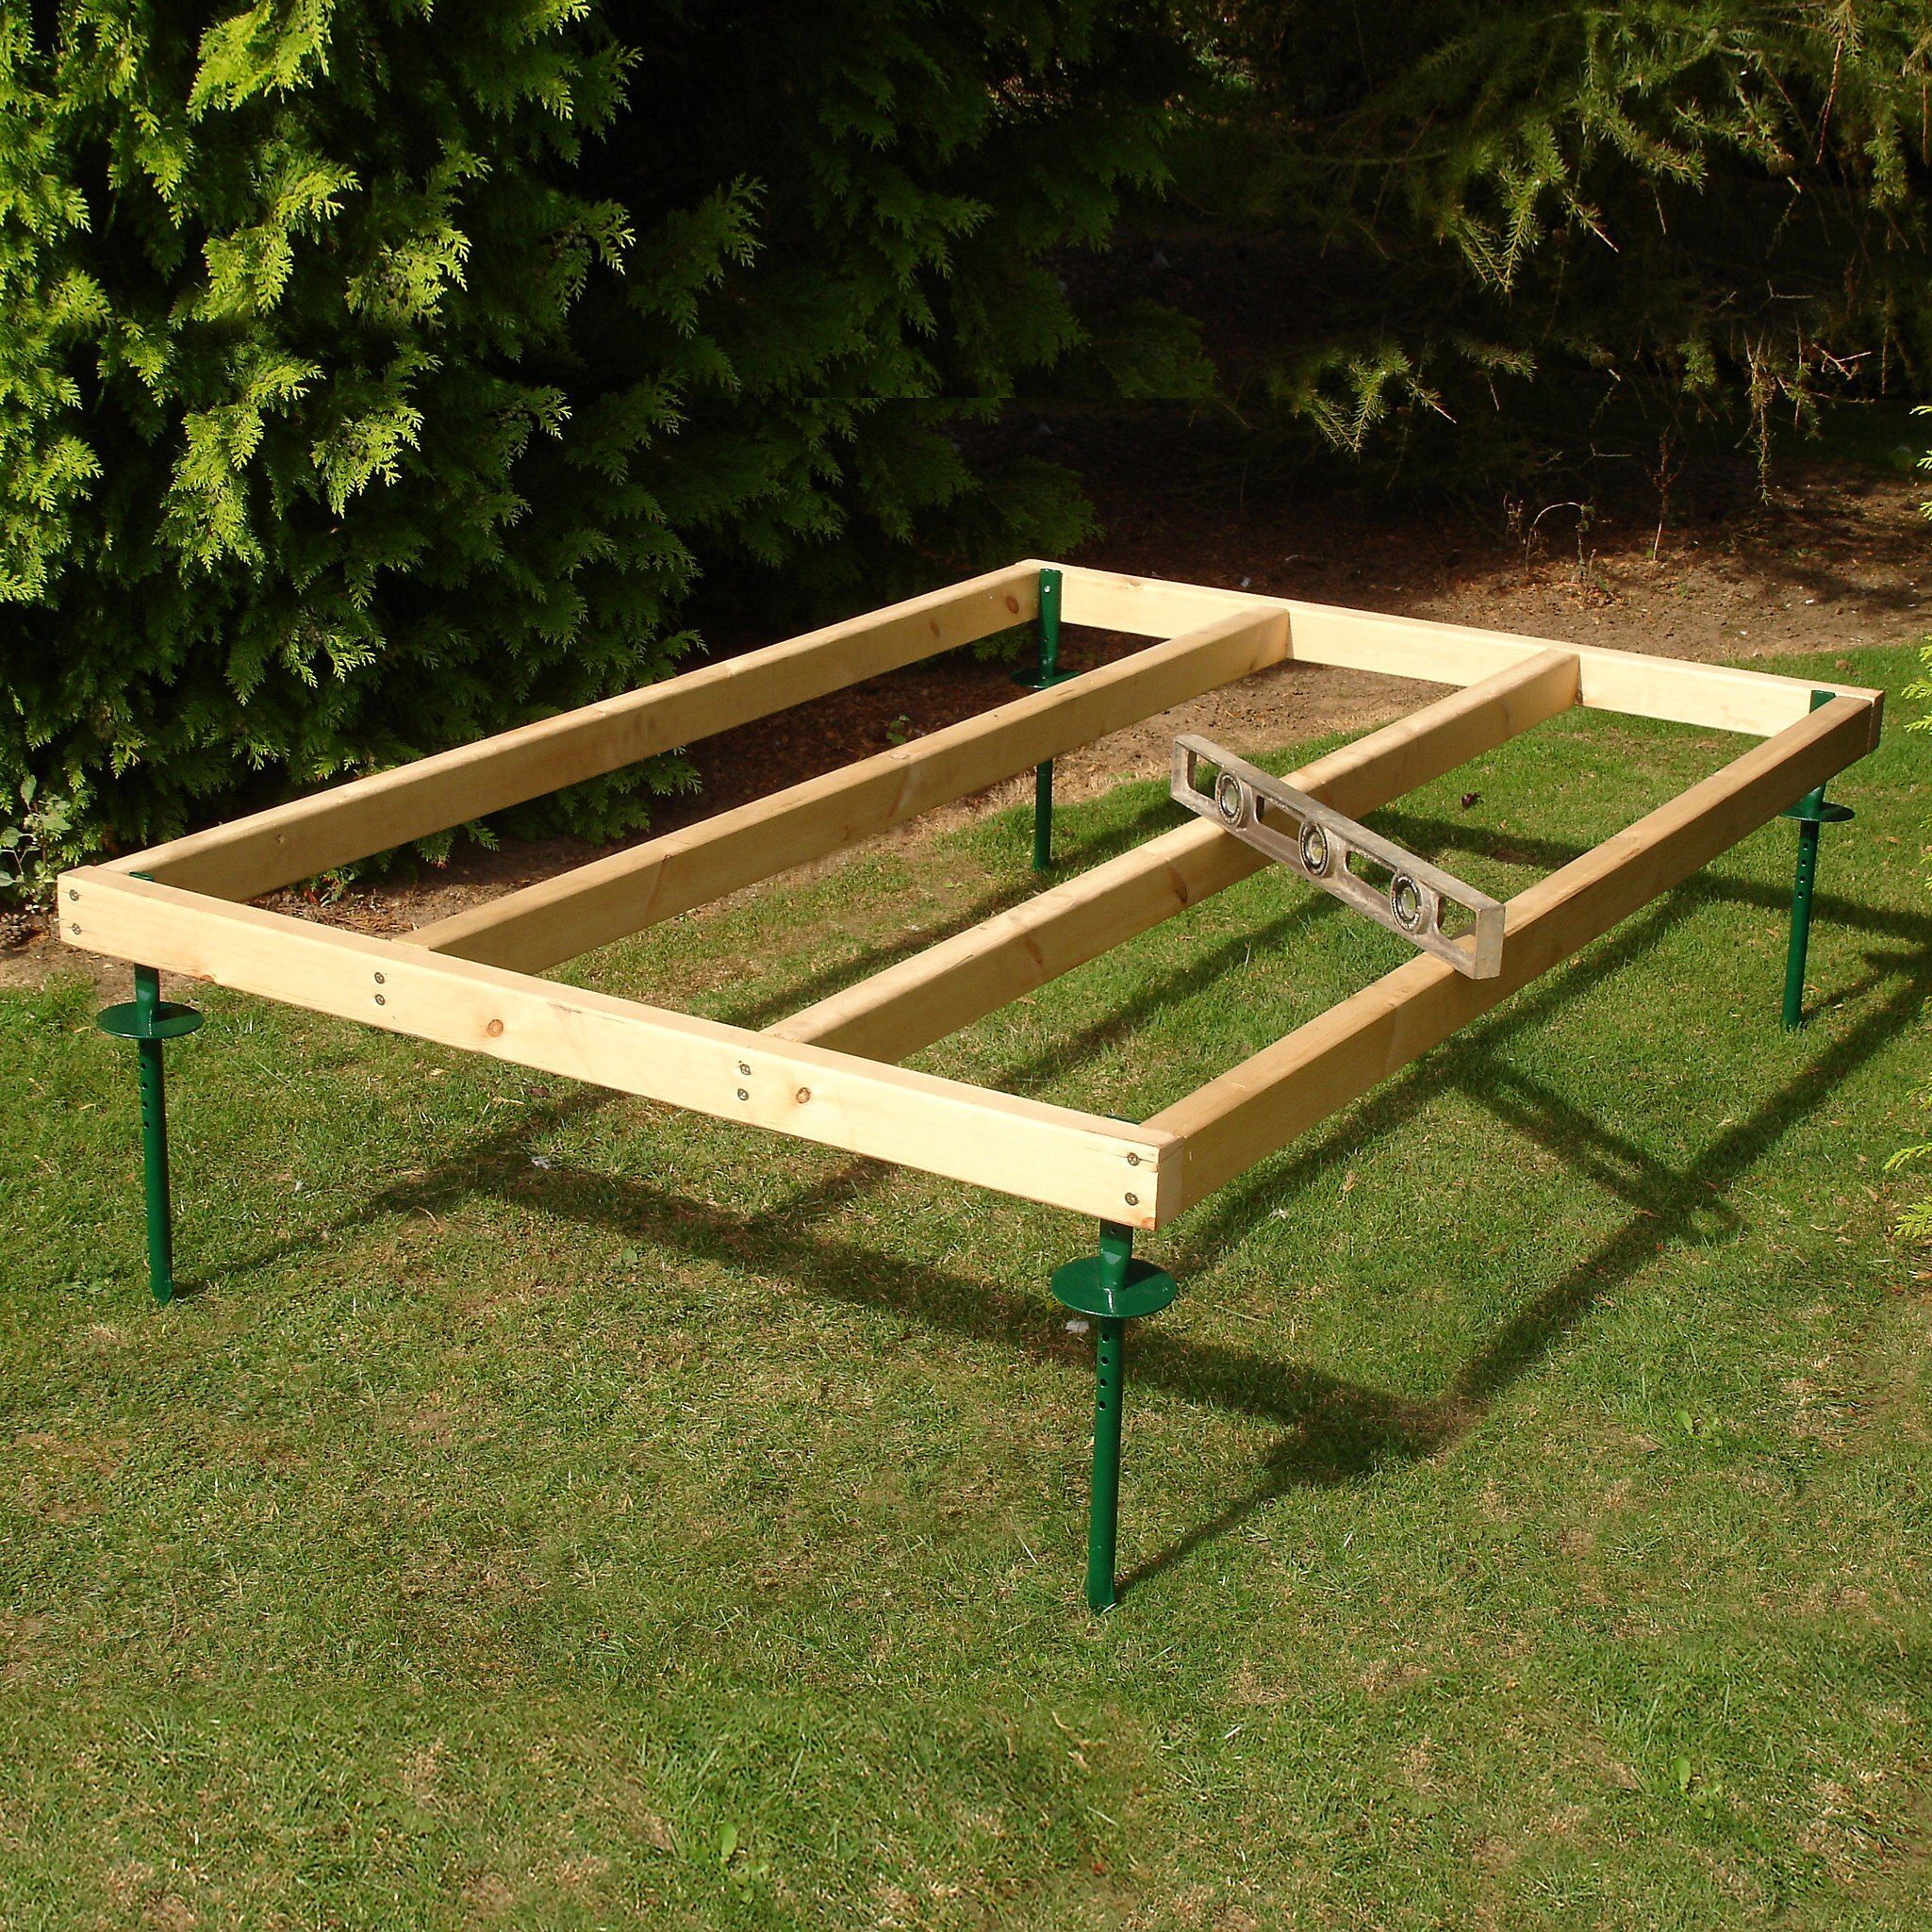 Shire Pressure treated timber base 6x6